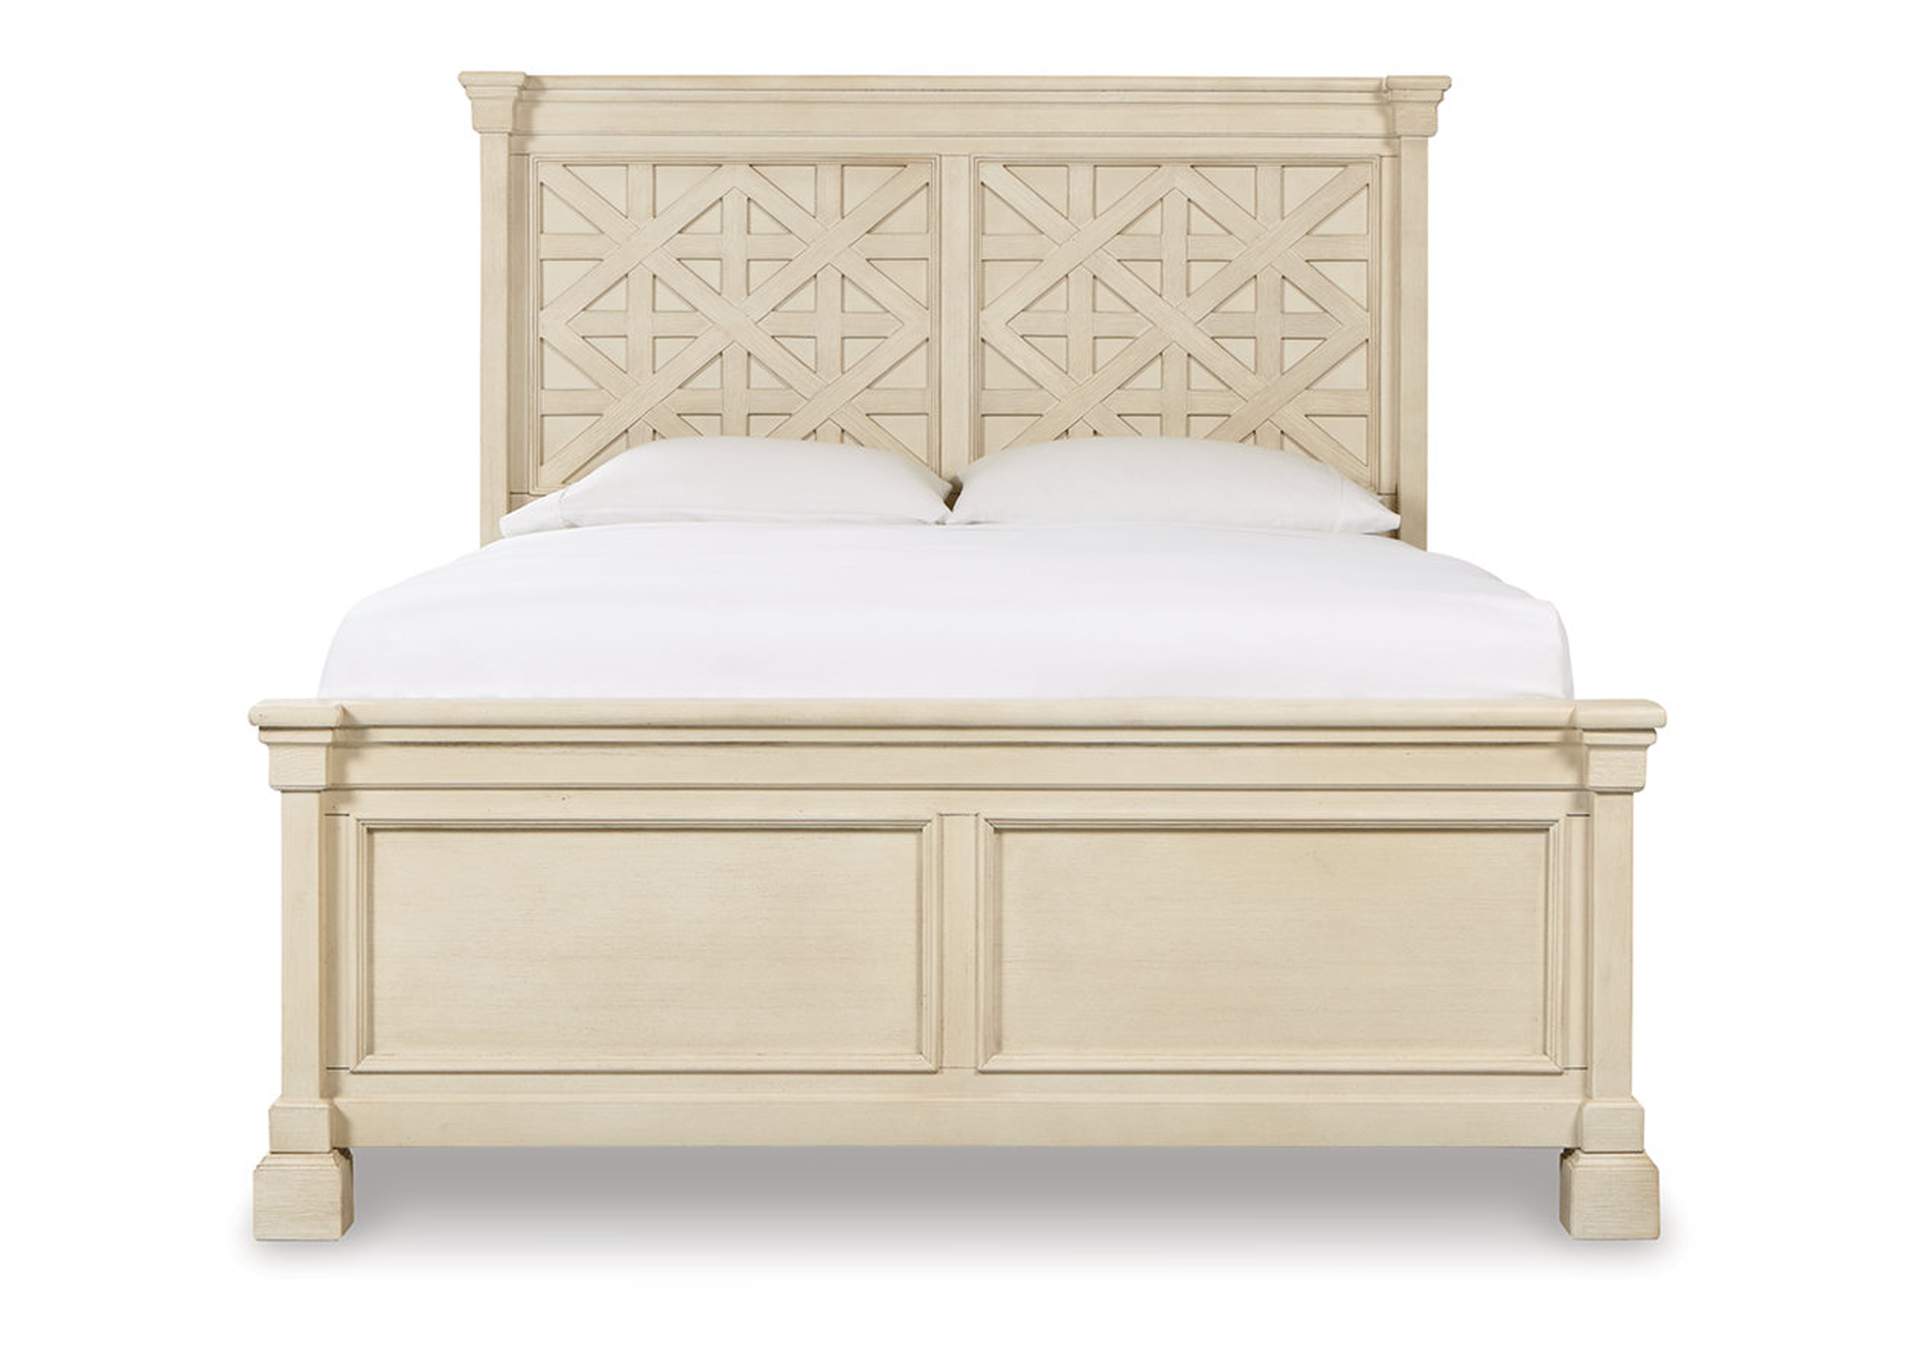 Bolanburg Queen Panel Bed,Signature Design By Ashley